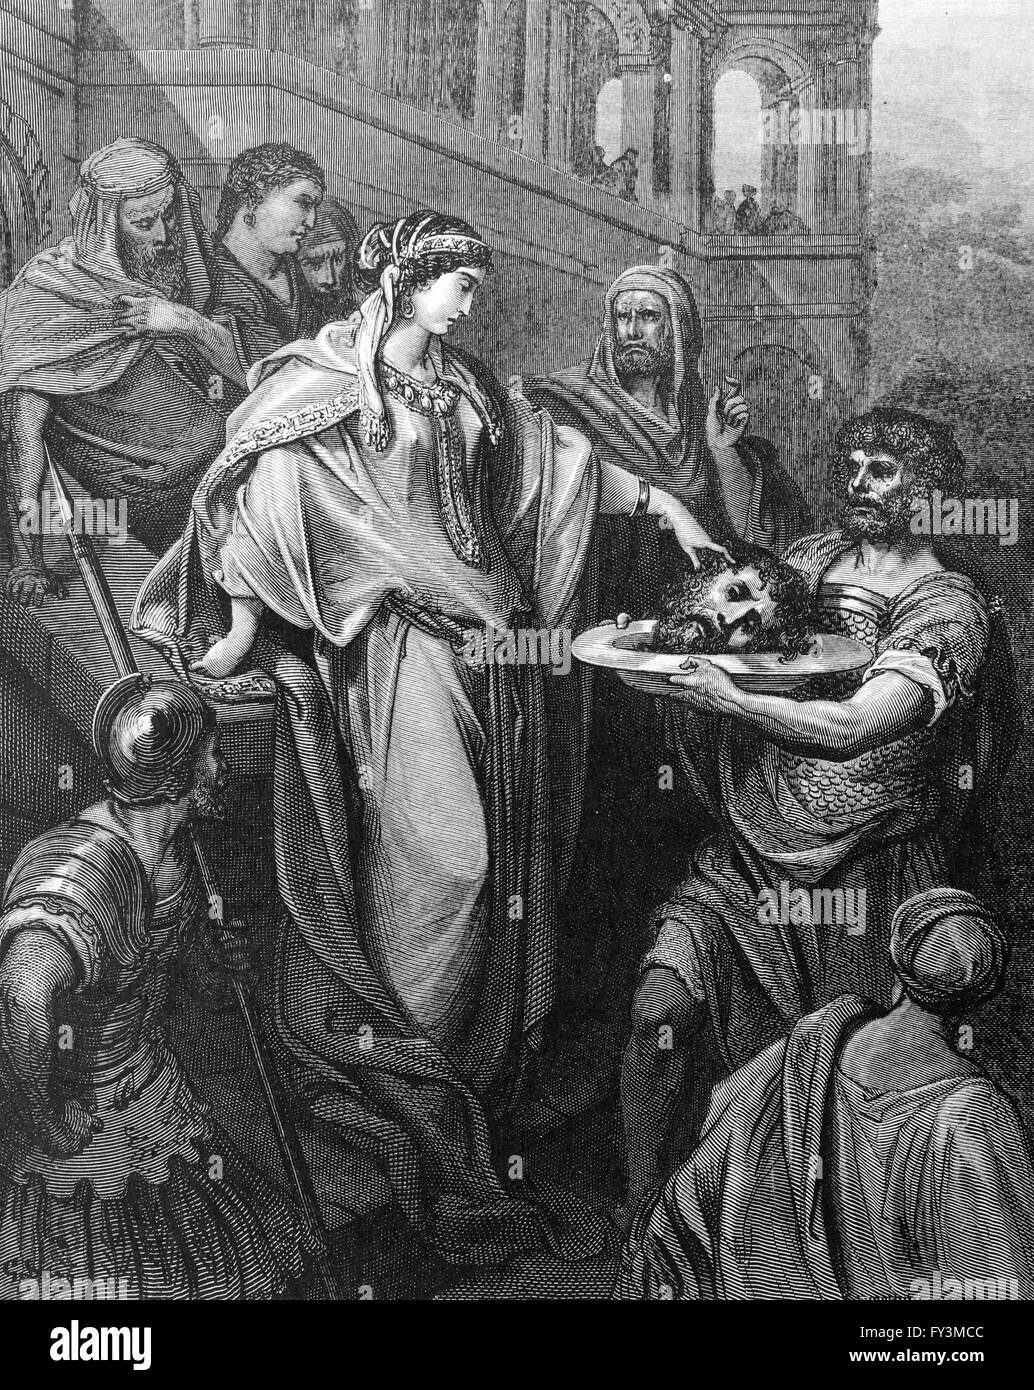 New Testament. Salome the daughter of Herod receiving the Head of John the Baptist.1855. Engraving by Gustave Dore. Stock Photo